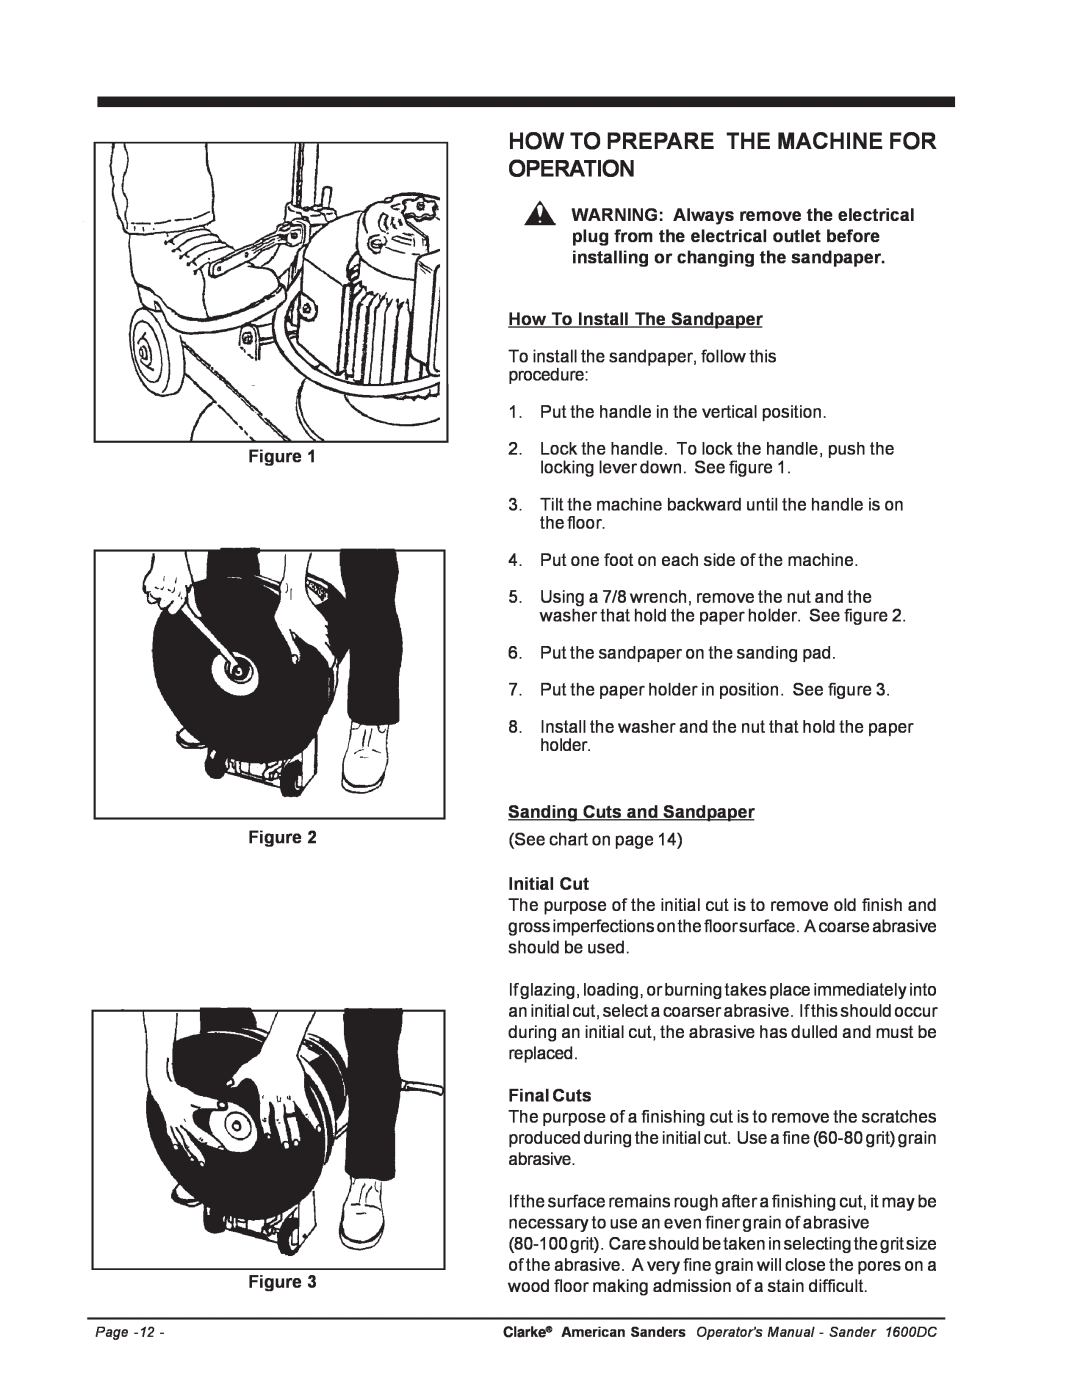 Nilfisk-ALTO C.A.V. 15 manual How To Prepare The Machine For Operation, Figure Figure Figure, How To Install The Sandpaper 